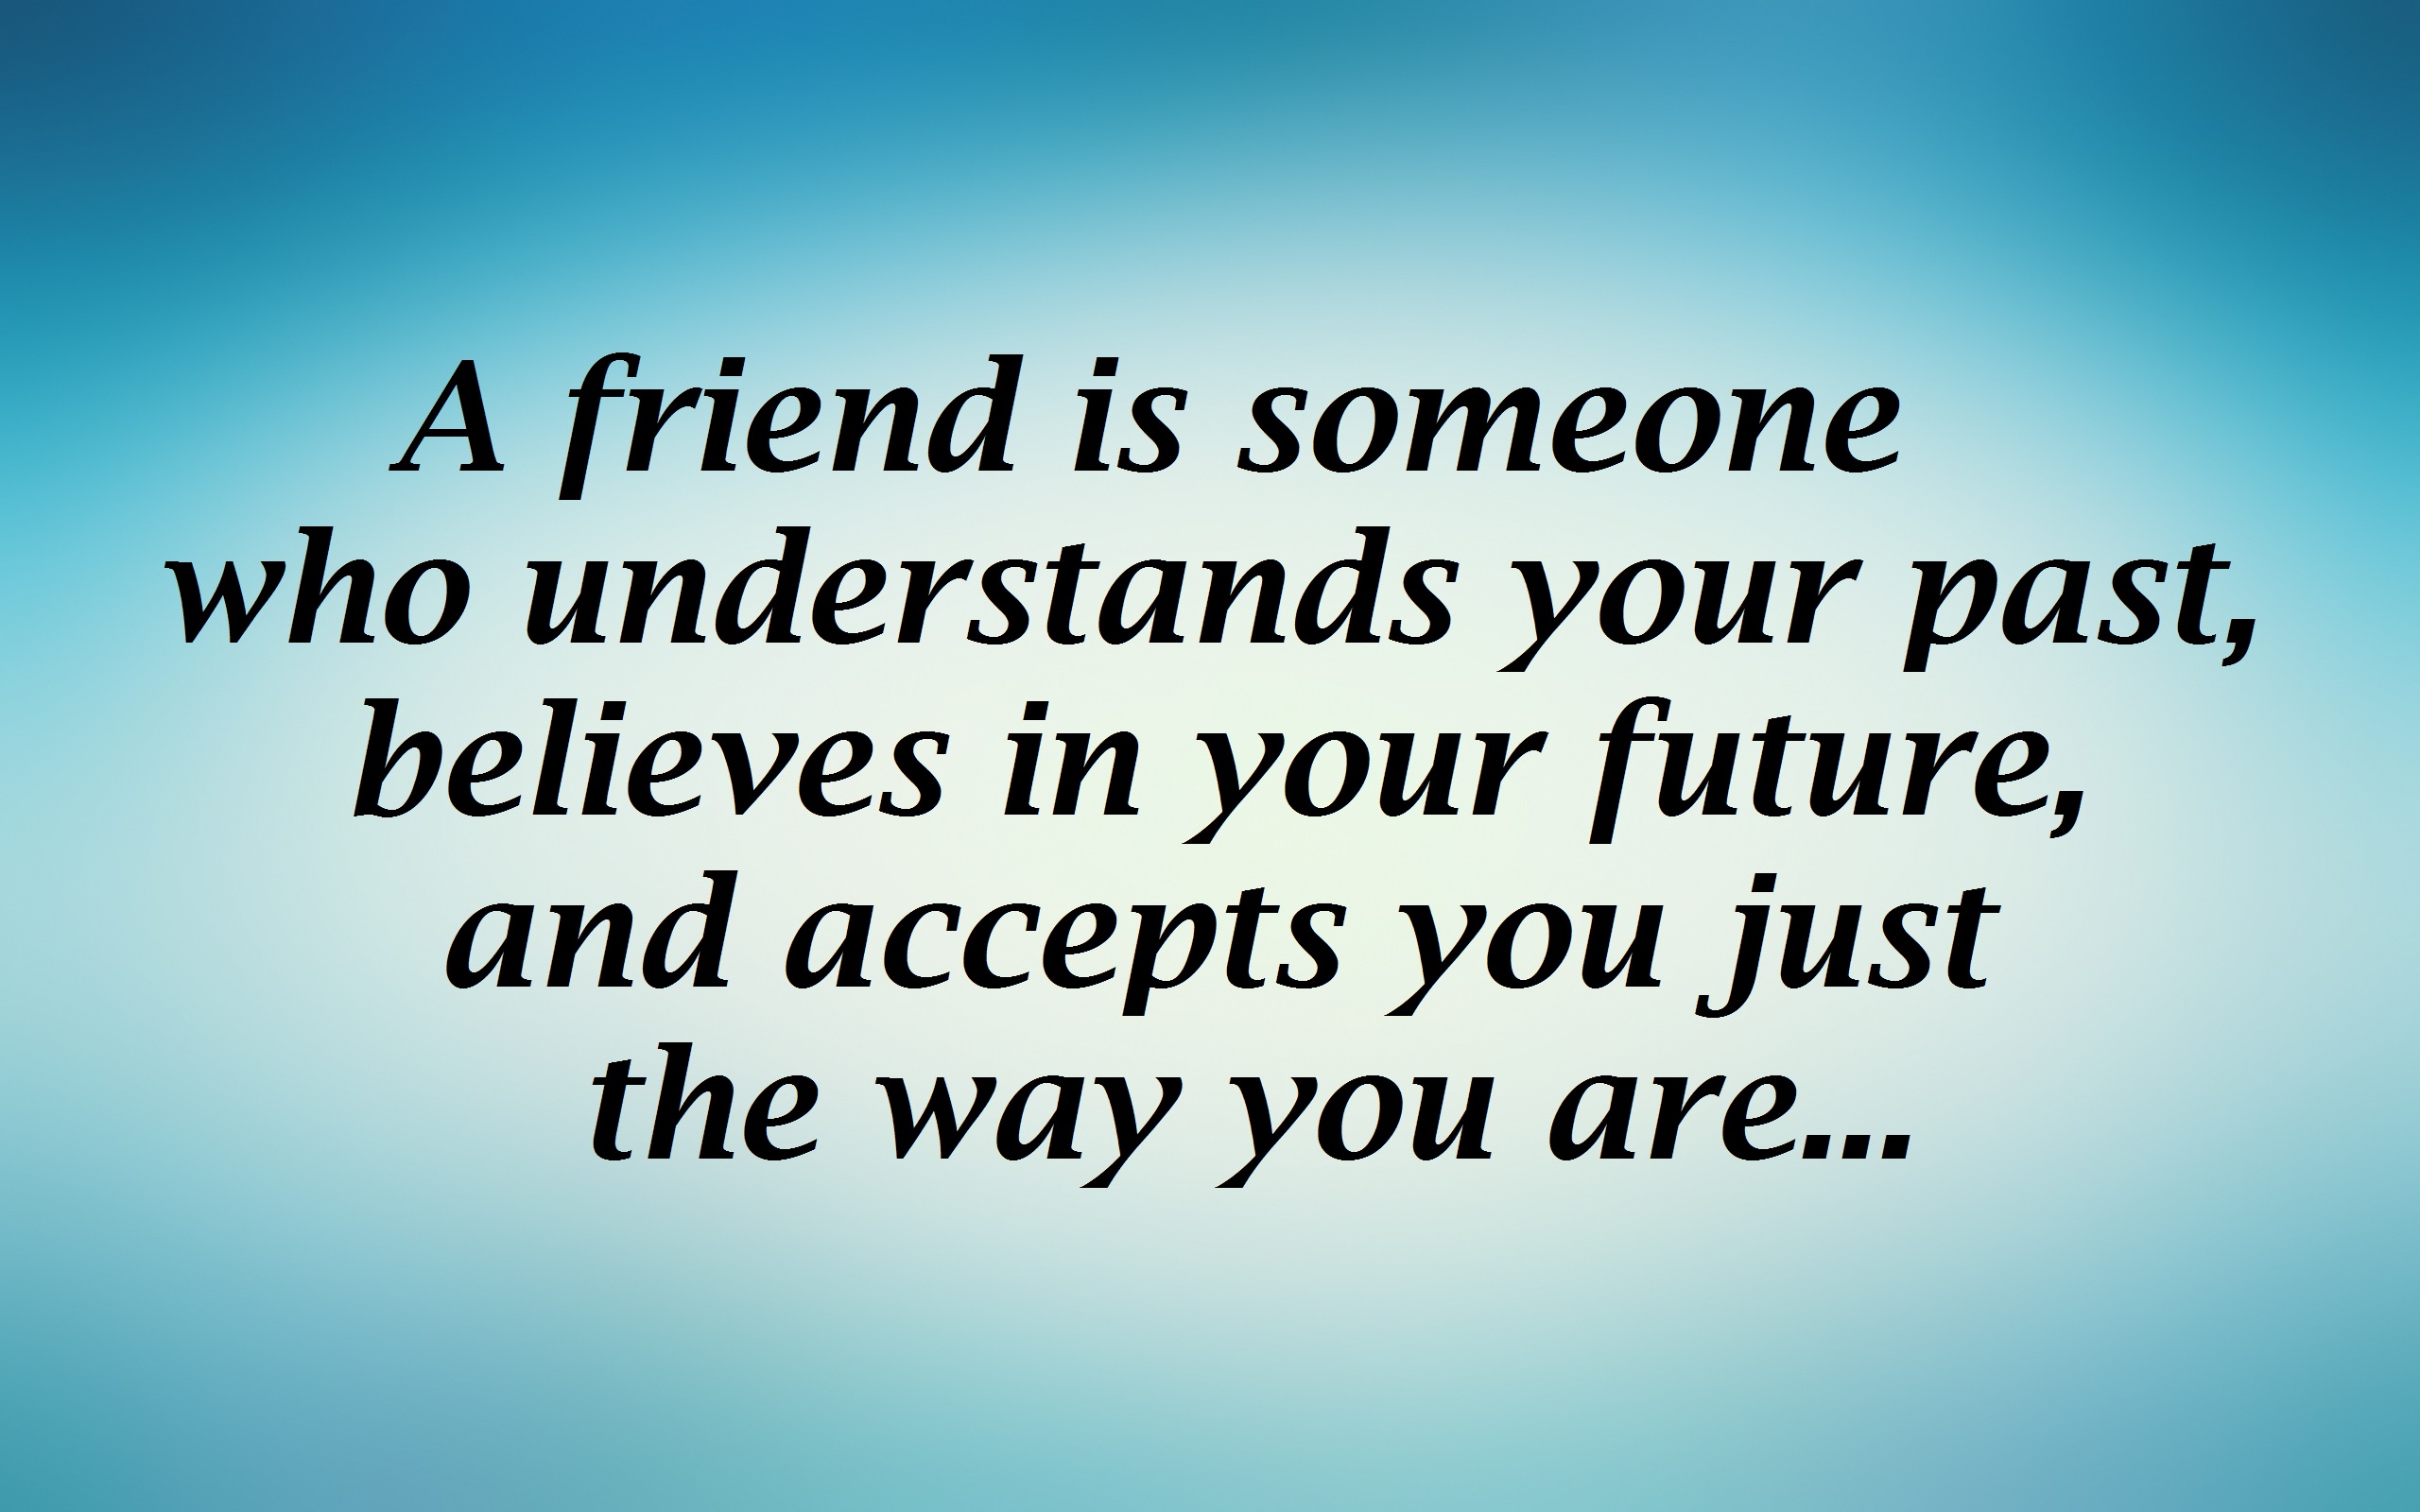 quotes on friendship image